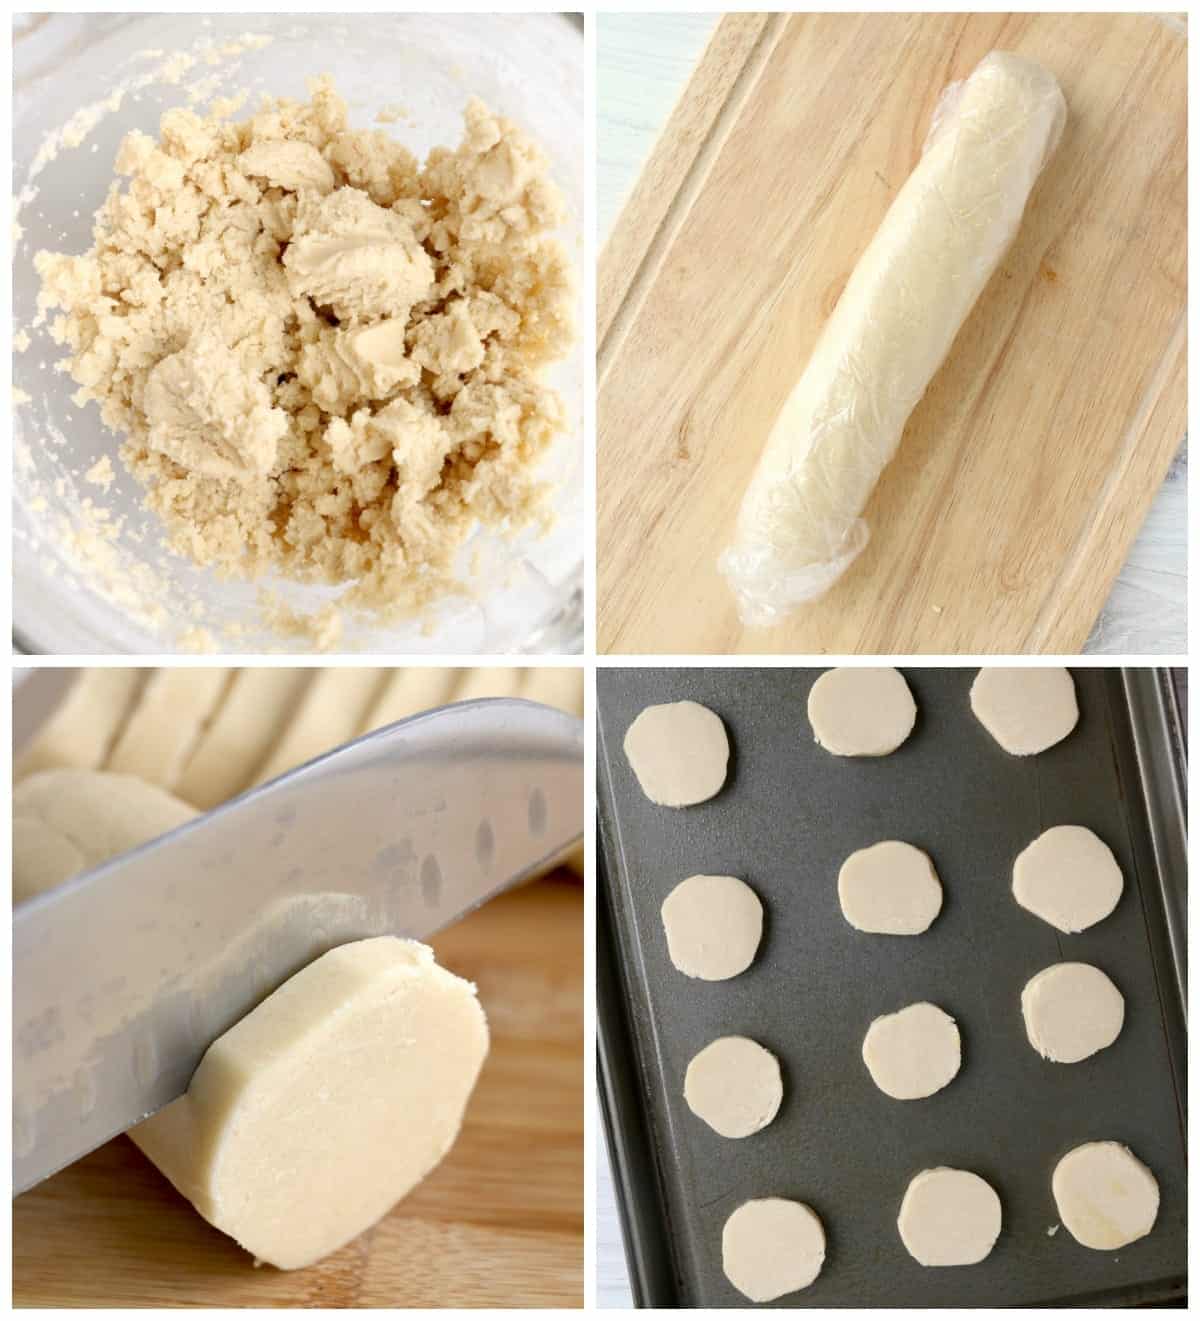 Four process photos. First one, dough all mixed together Second photo, dough rolled out into a log. Third one, dough being sliced with a knife. Fourth one, sliced cookies on a baking sheet.